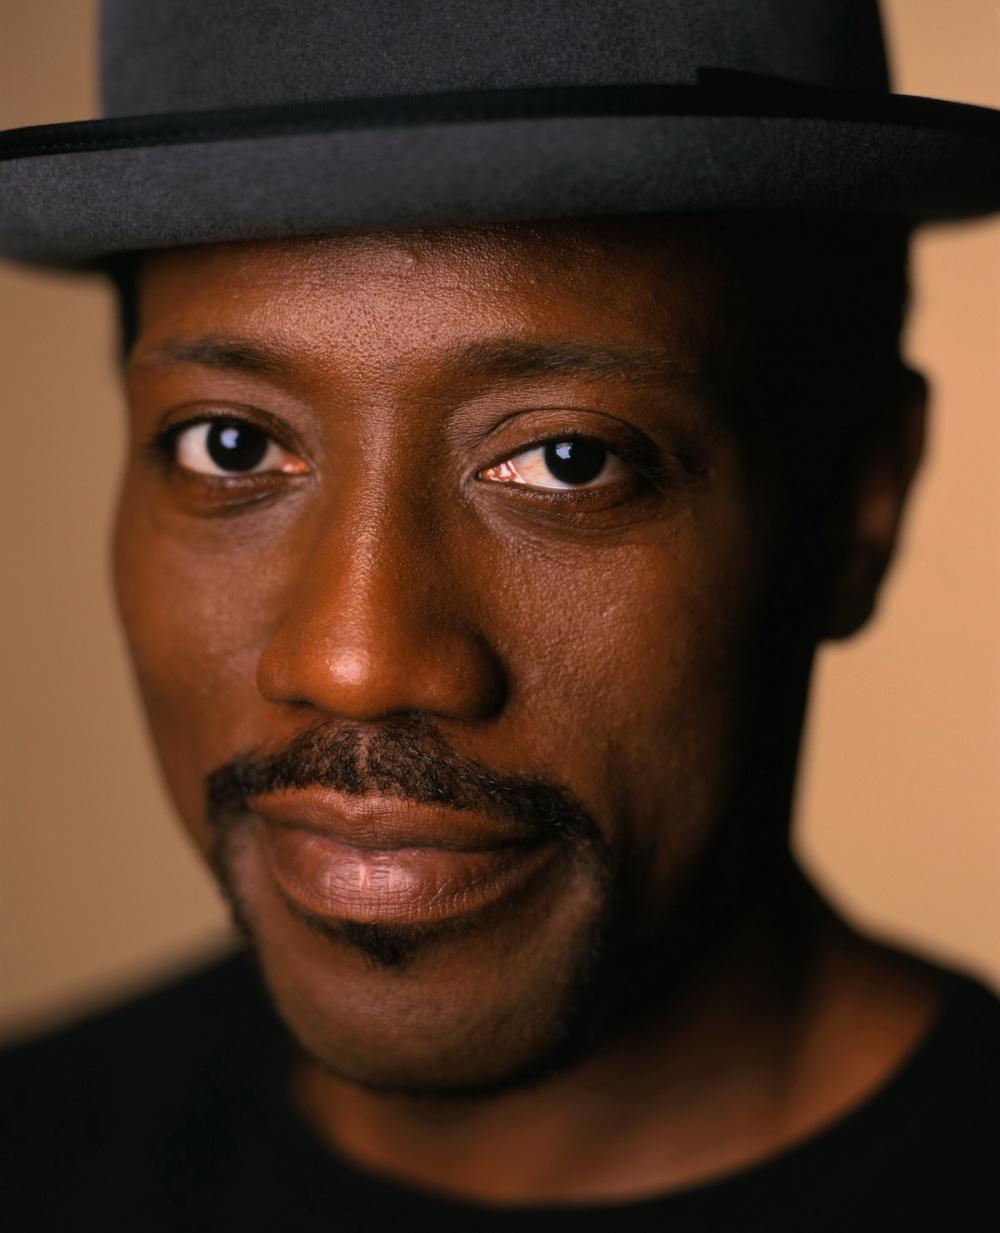 Photo №6789 Wesley Snipes.